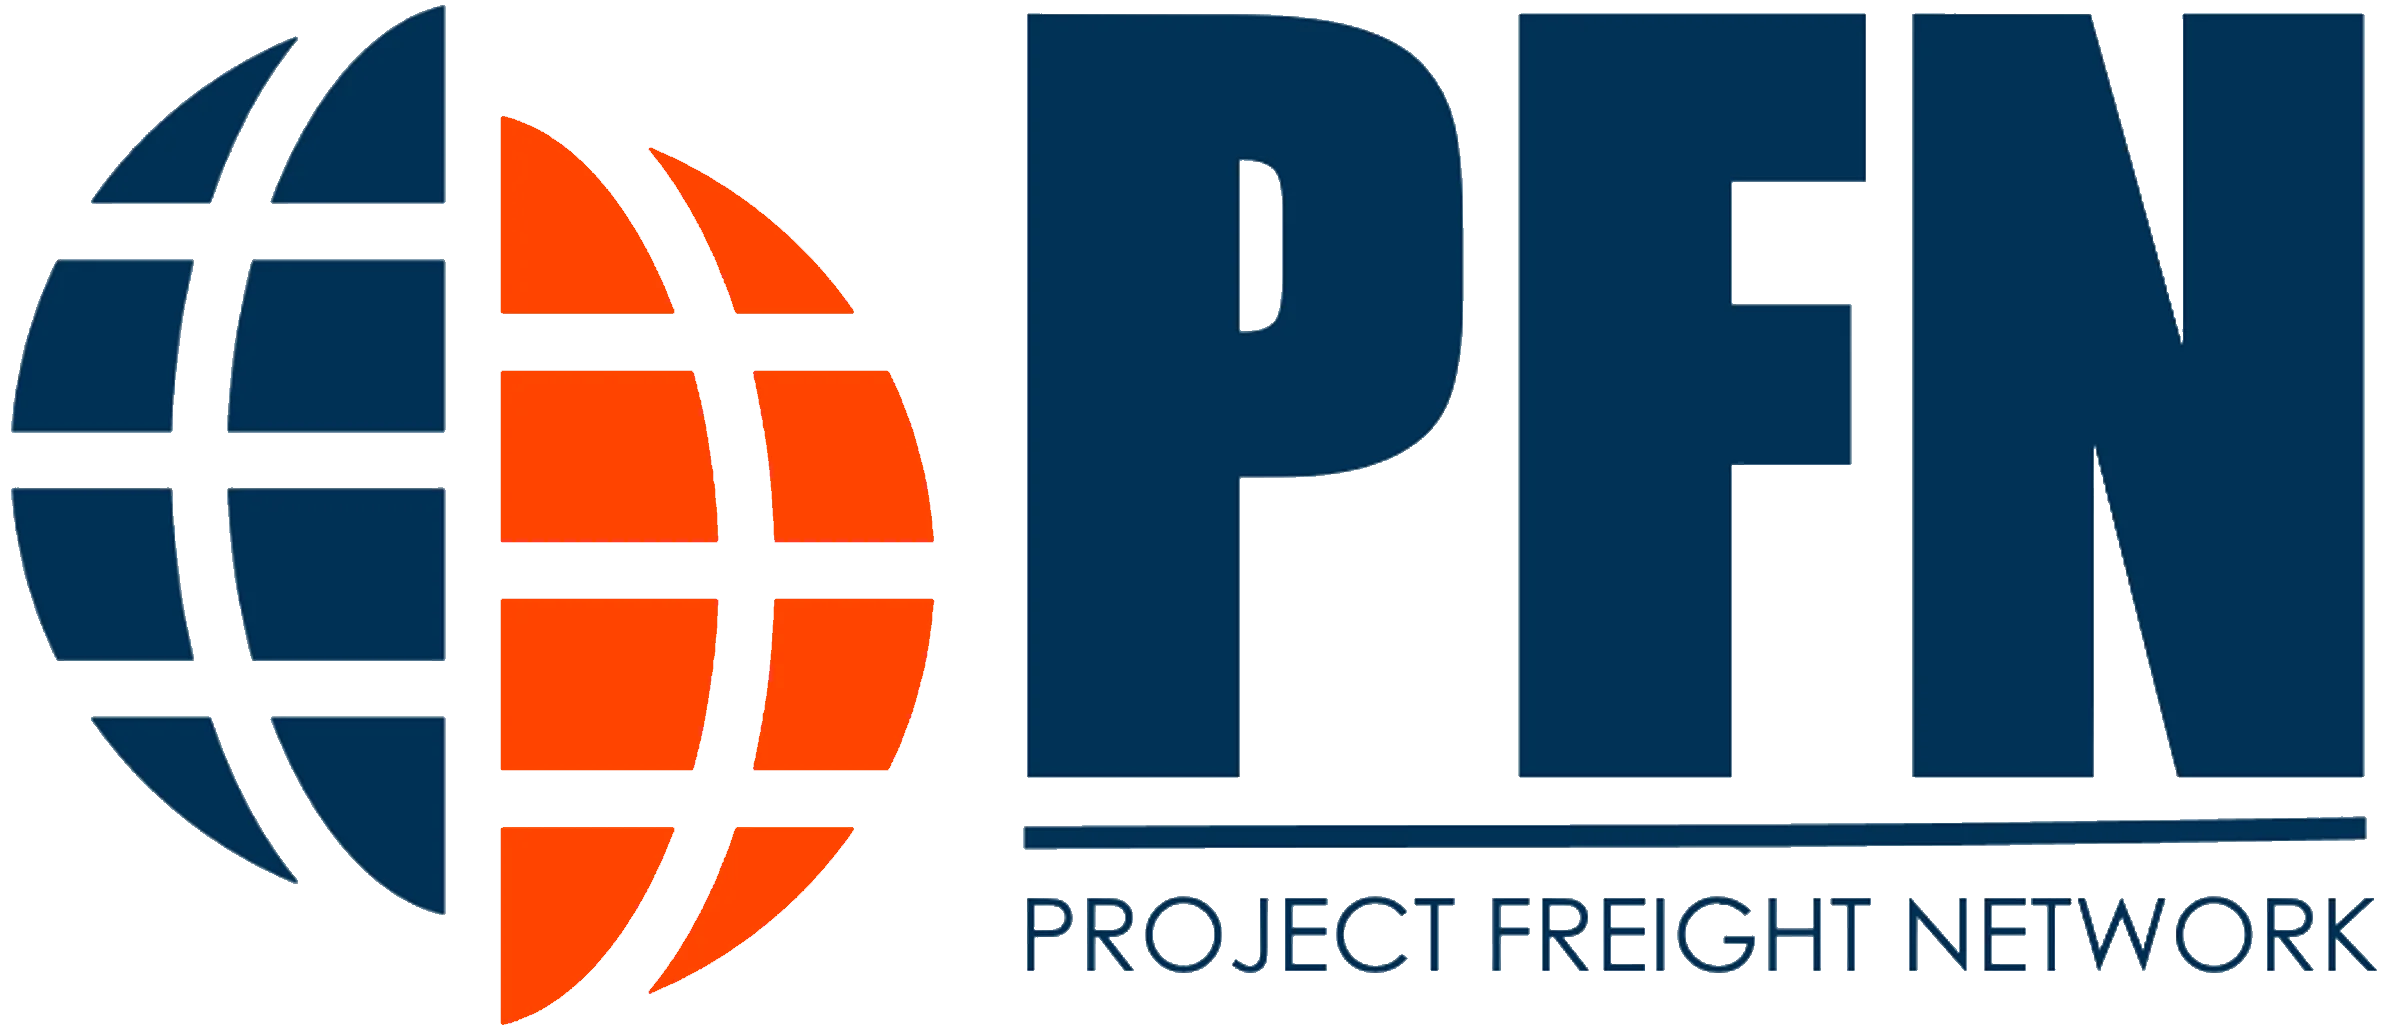 Project Freight Network